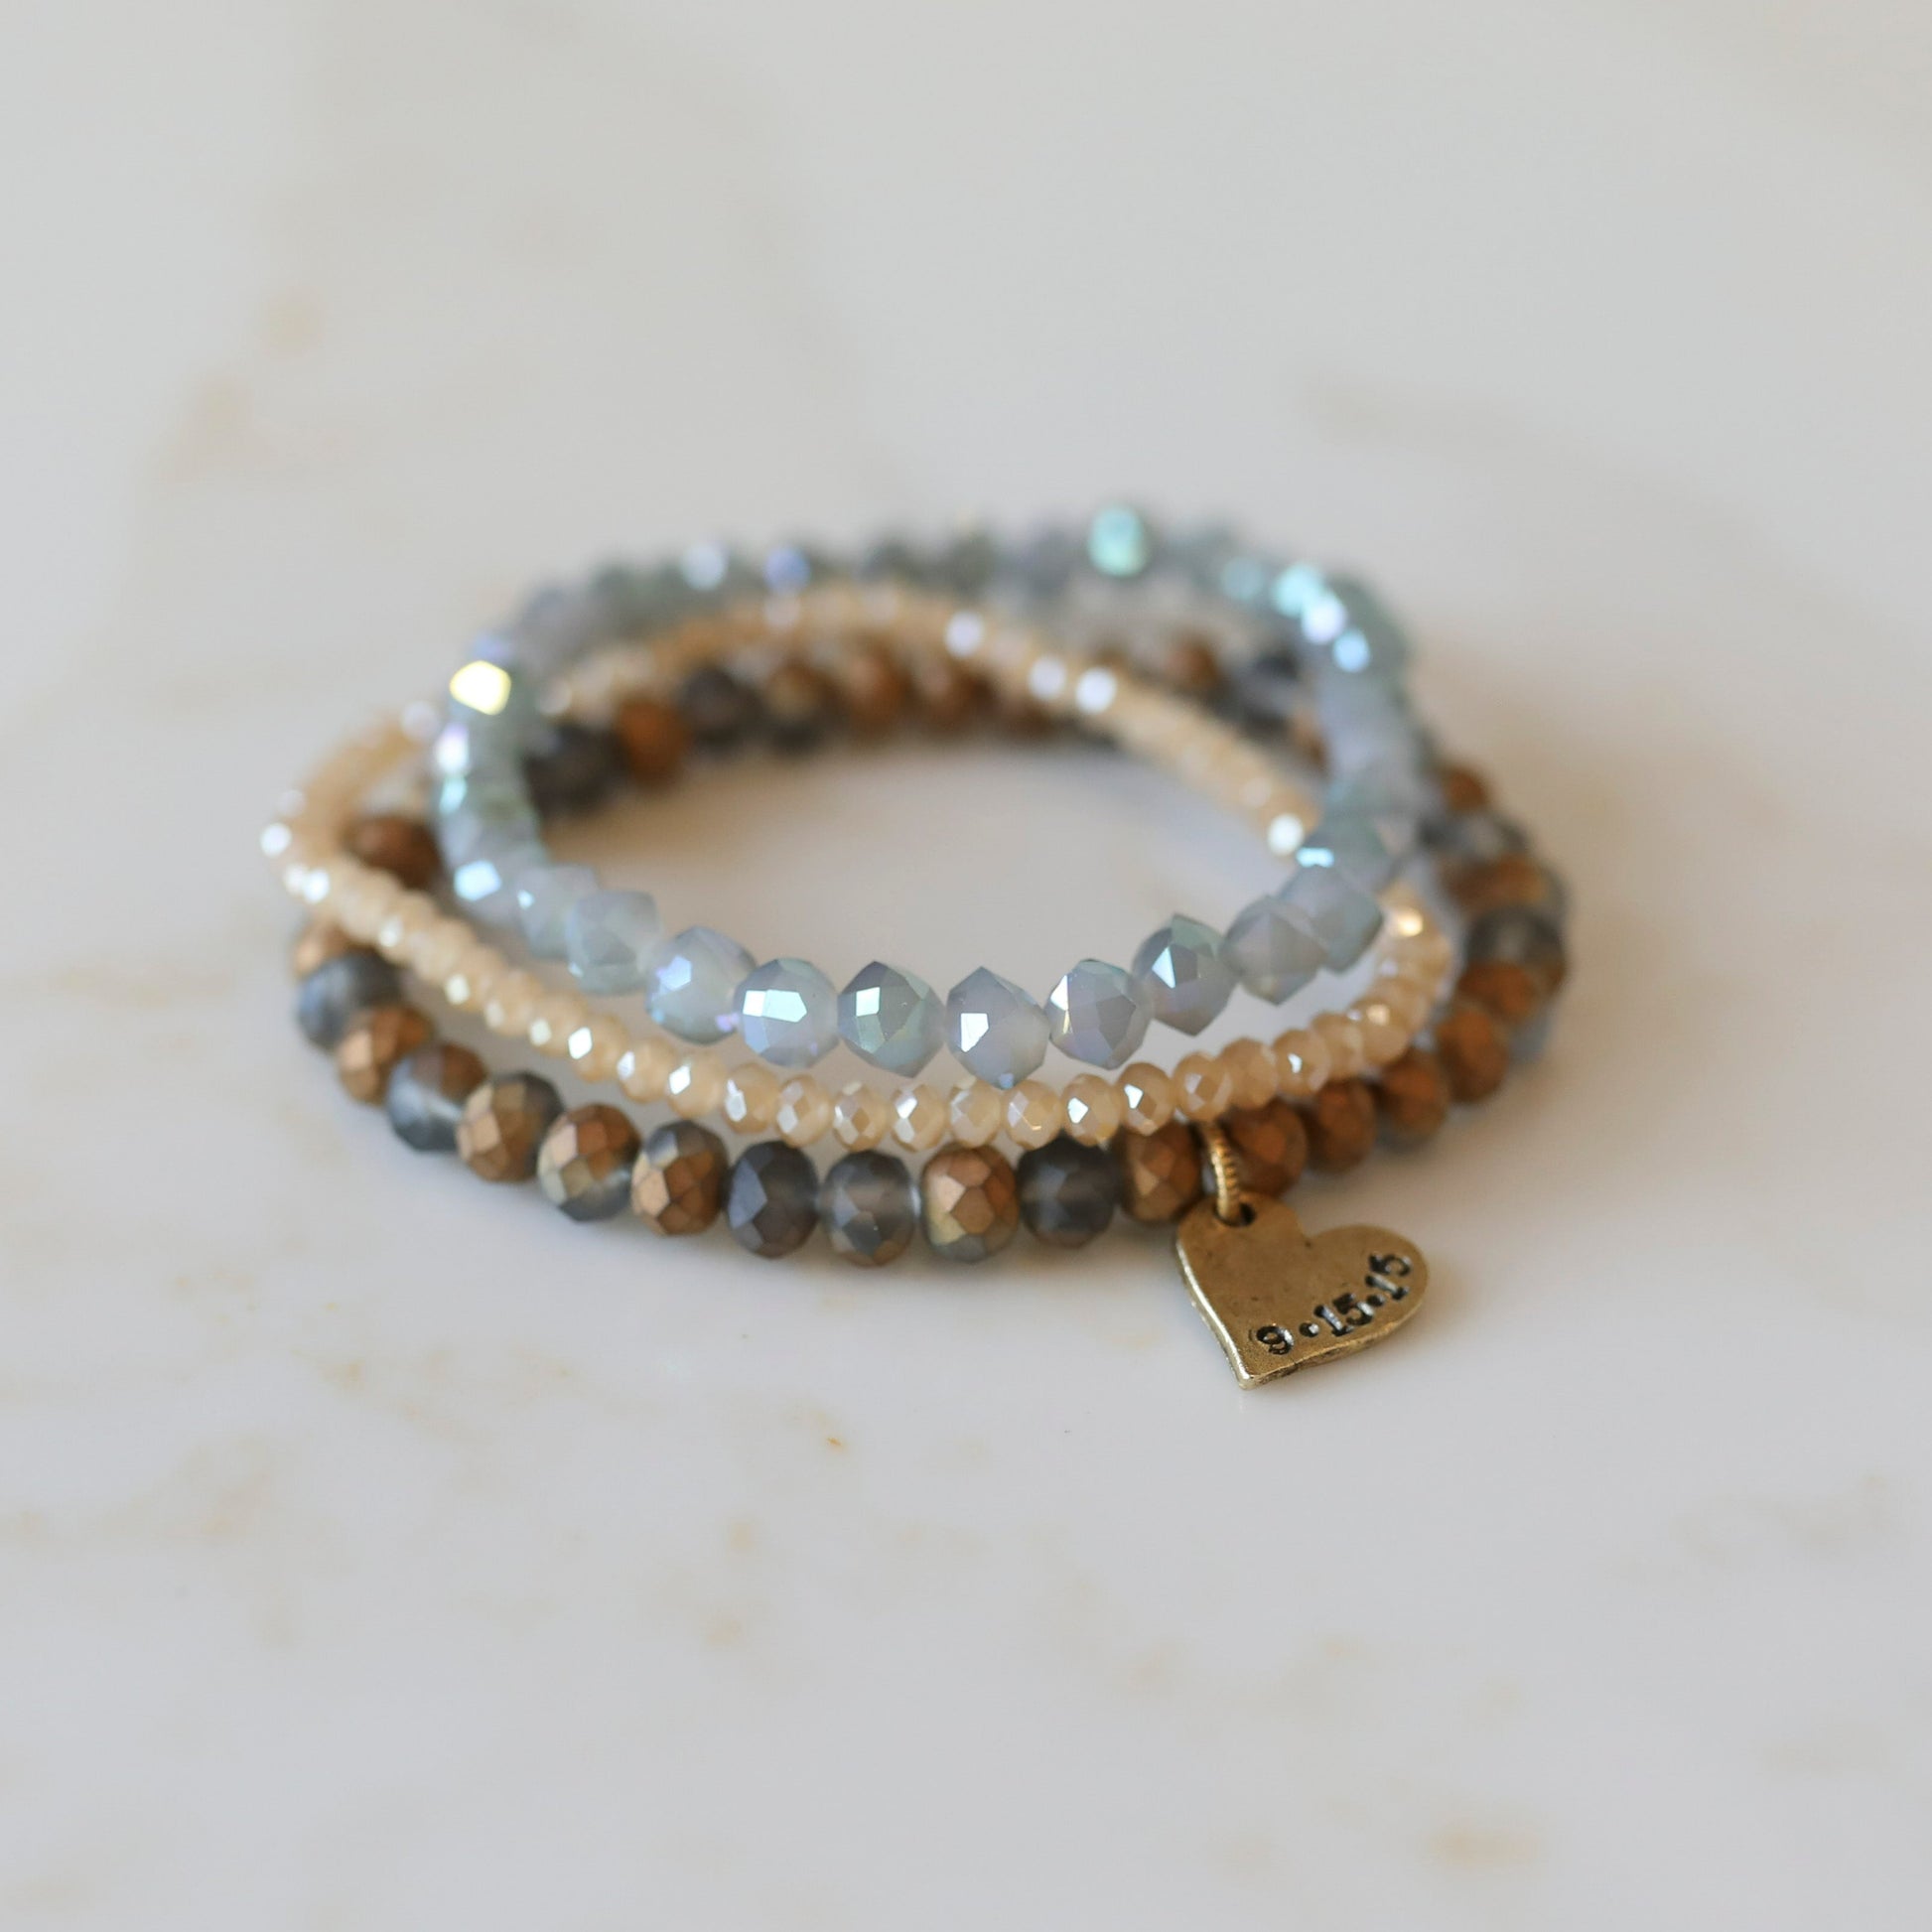 Anniversary Stack Bracelets with Crystal Beads - Blue Mix